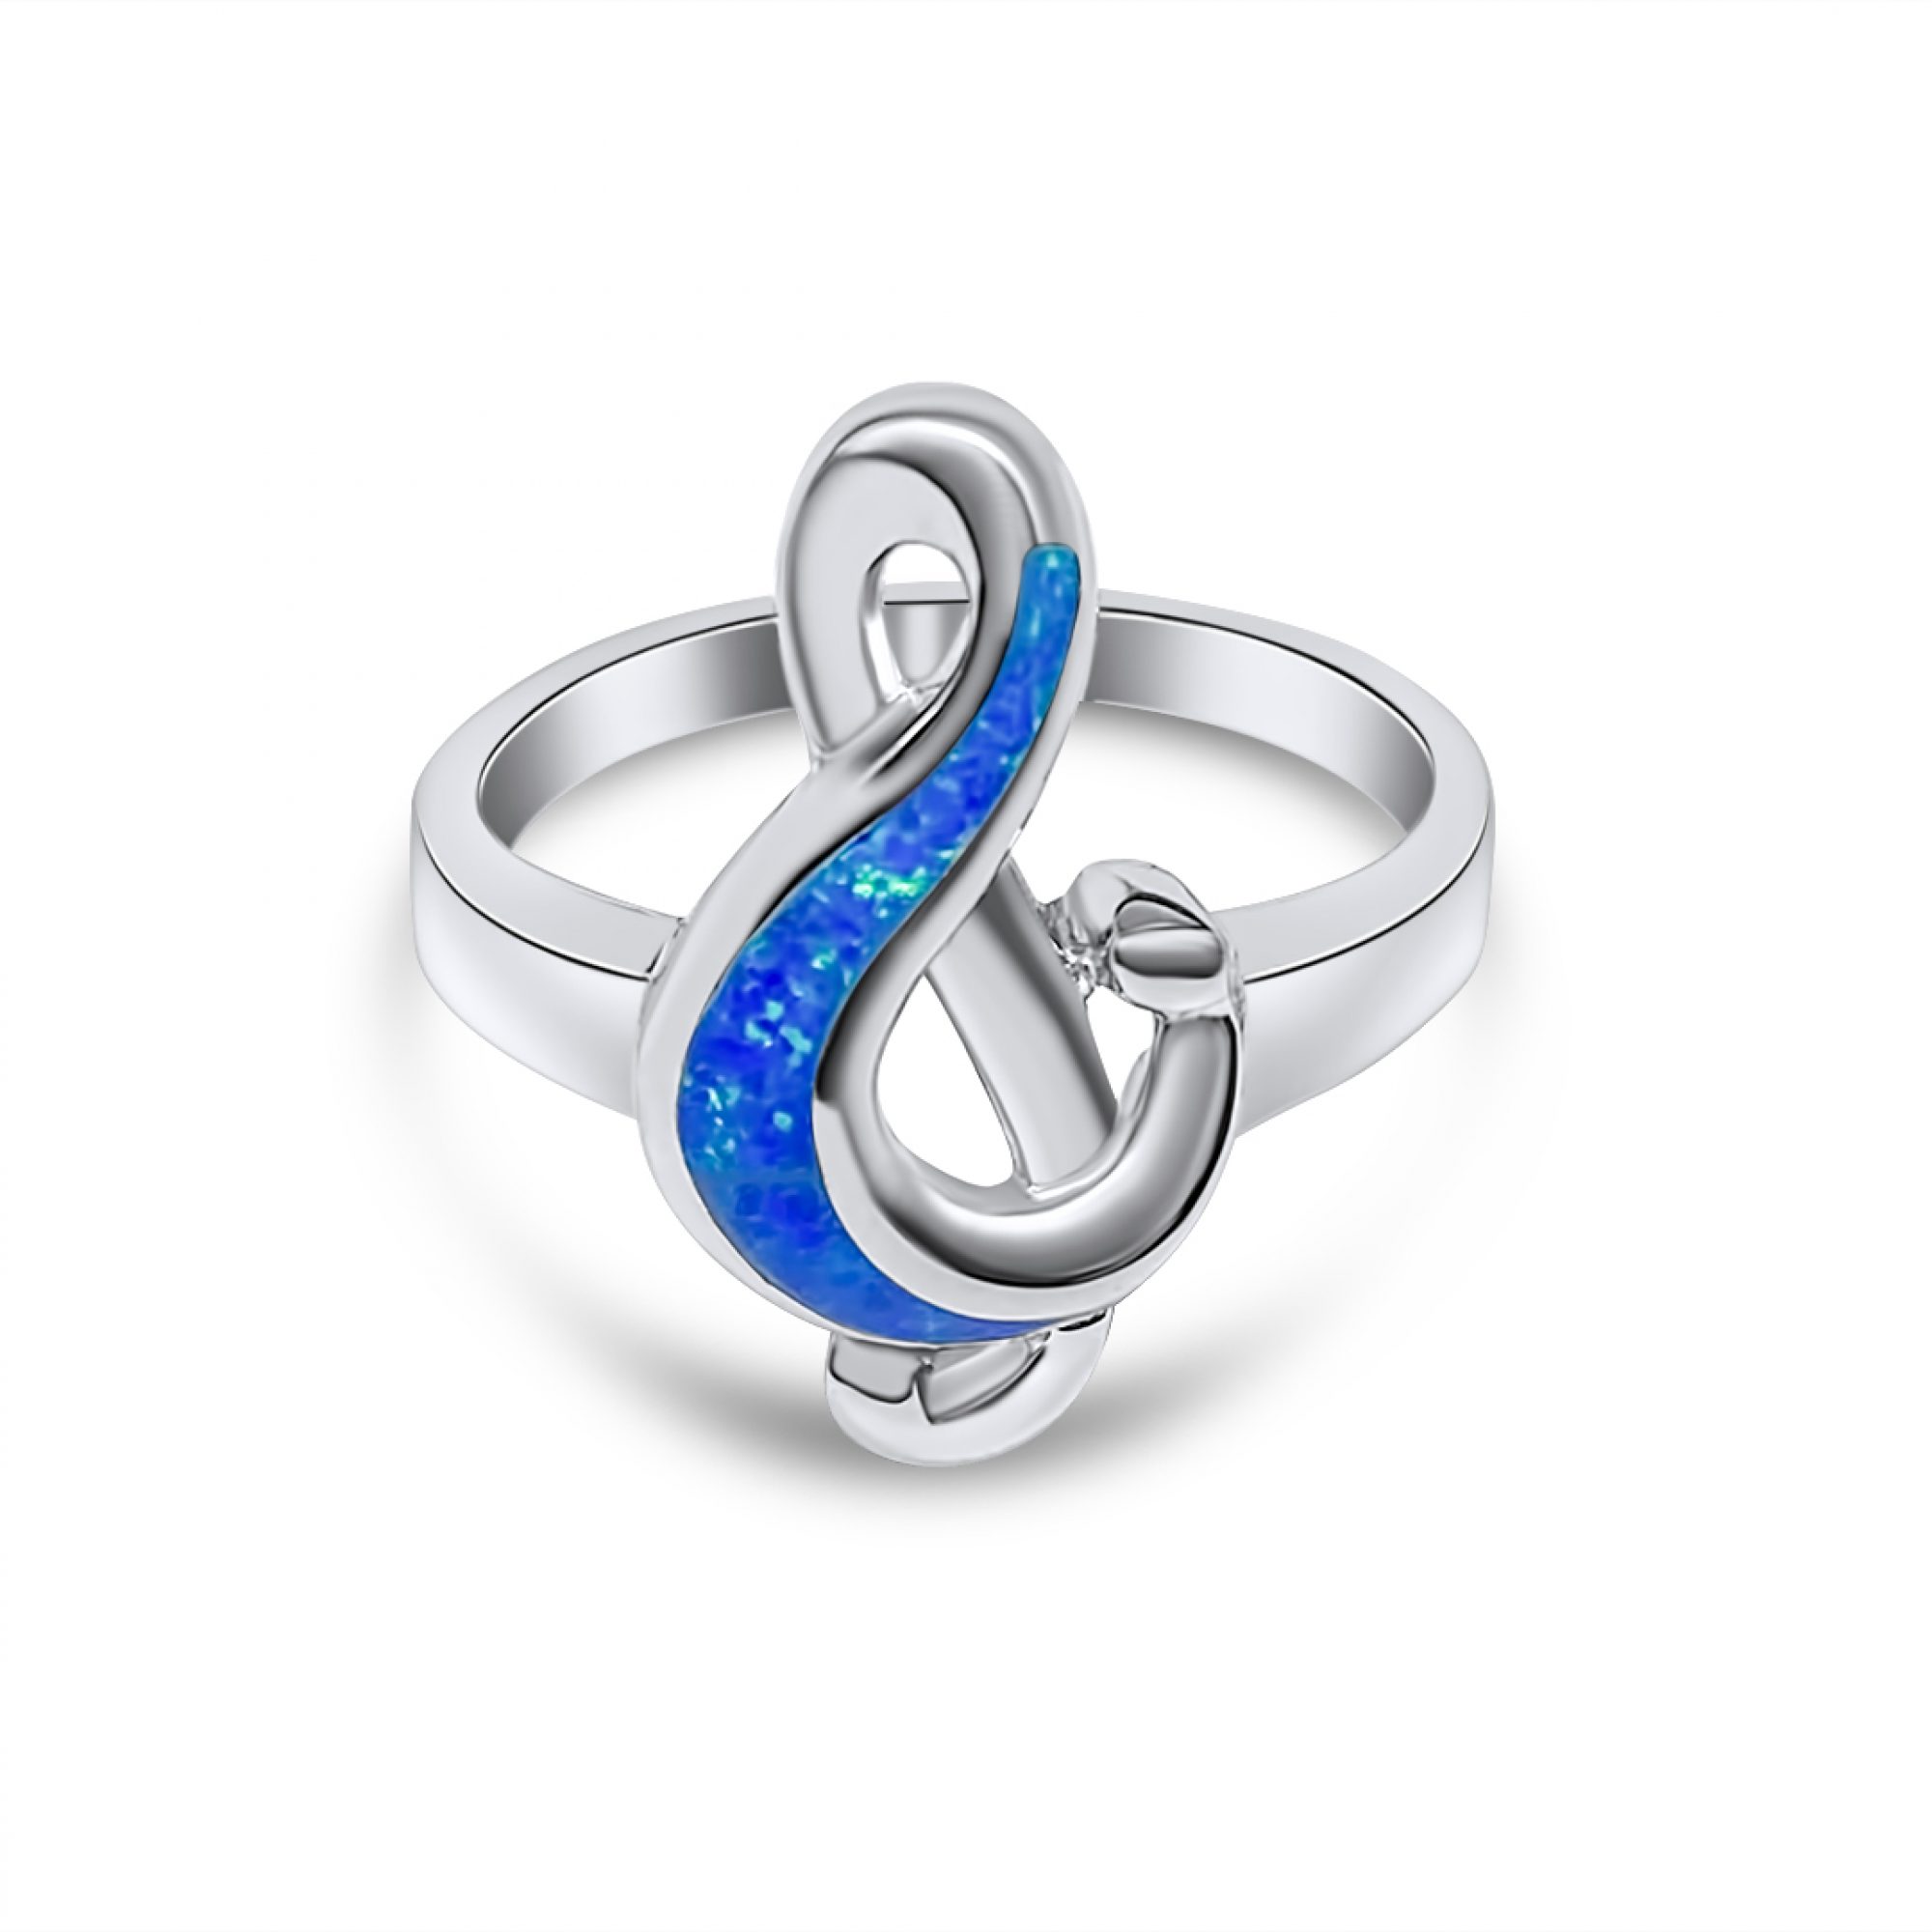 Silver treble clef ring with opal stone